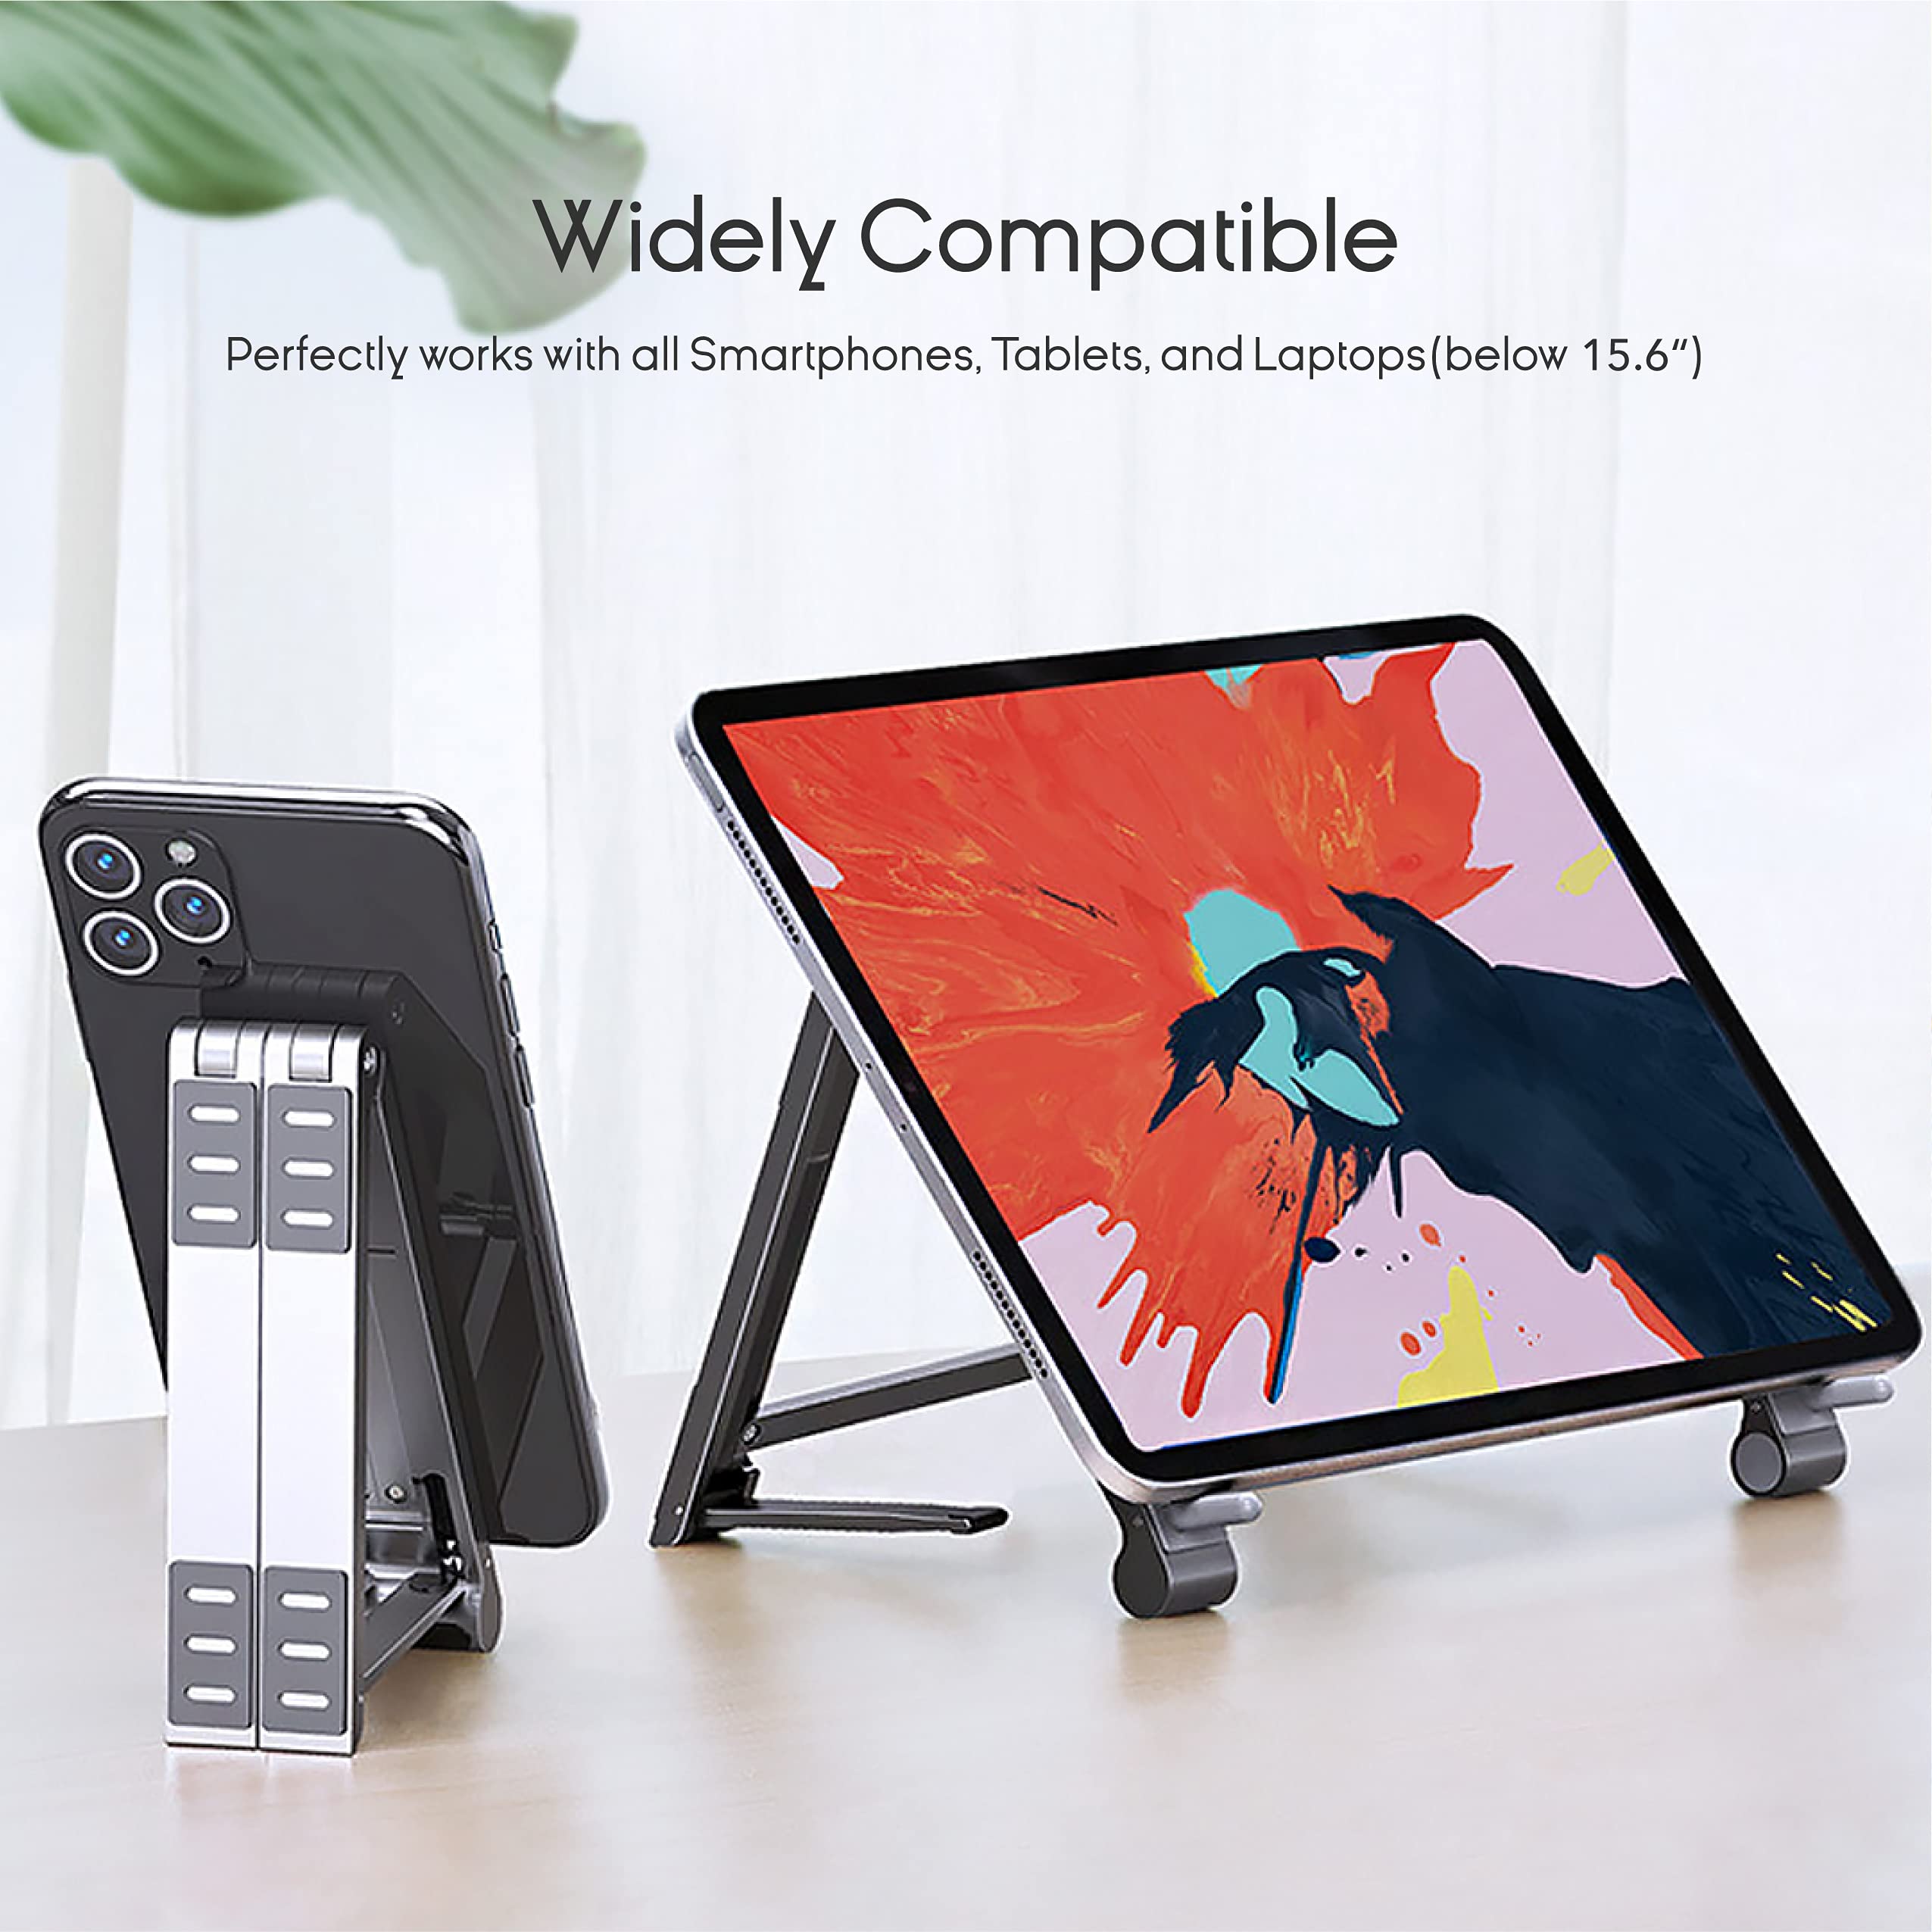 Whardeeg Magic X1, Mini 3-in-1 Multi-Function Laptop Stand, Pocket Size Adjustable Stand, fit Your Phone, Tablet, and Laptop(16'' and Below), Multi Angles Aluminum Ergonomic Device Riser